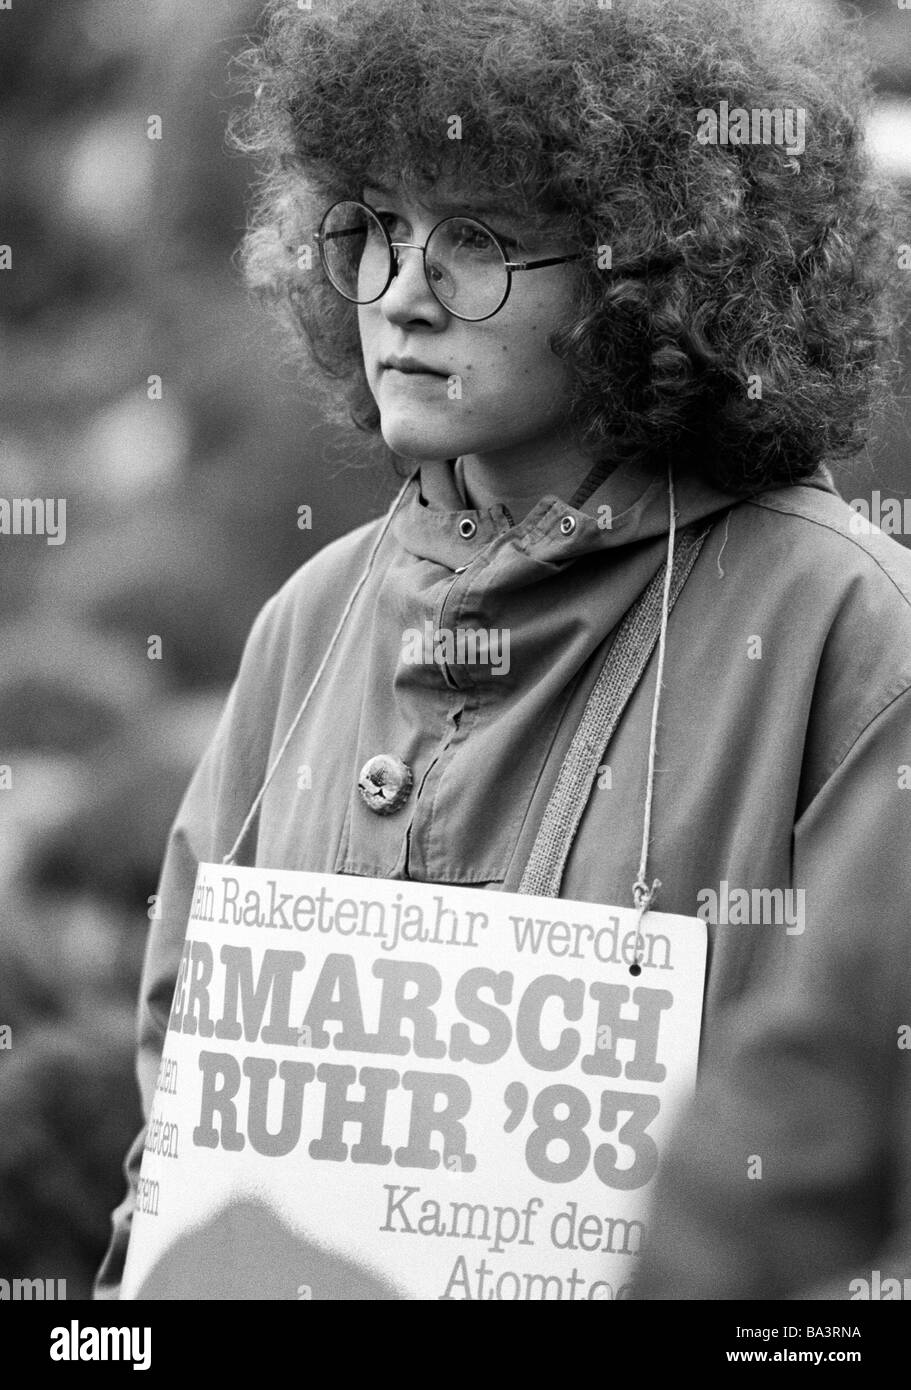 Eighties, black and white photo, people, peace demonstration, Easter marches 1983 in Germany against nuclear armament, young woman presents a protest sign, aged 18 to 22 years, D-Oberhausen, Ruhr area, North Rhine-Westphalia Stock Photo